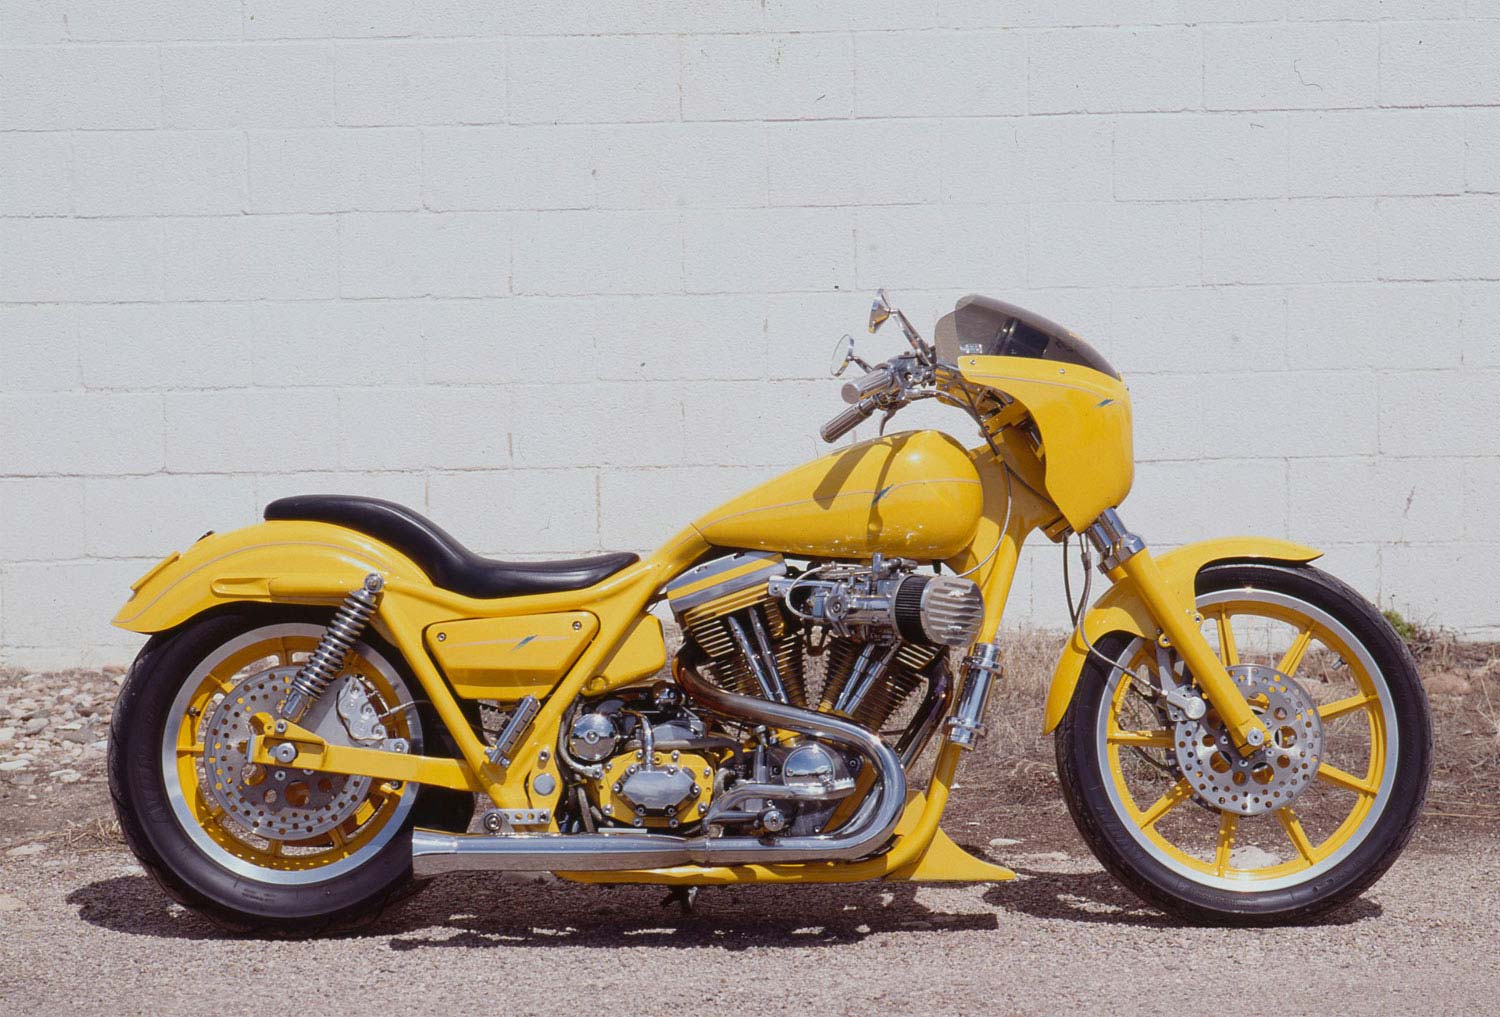 The gas tank and frame were modified to flow together so cleanly on Gene Koch’s “Hamster Yellow” FXRH.